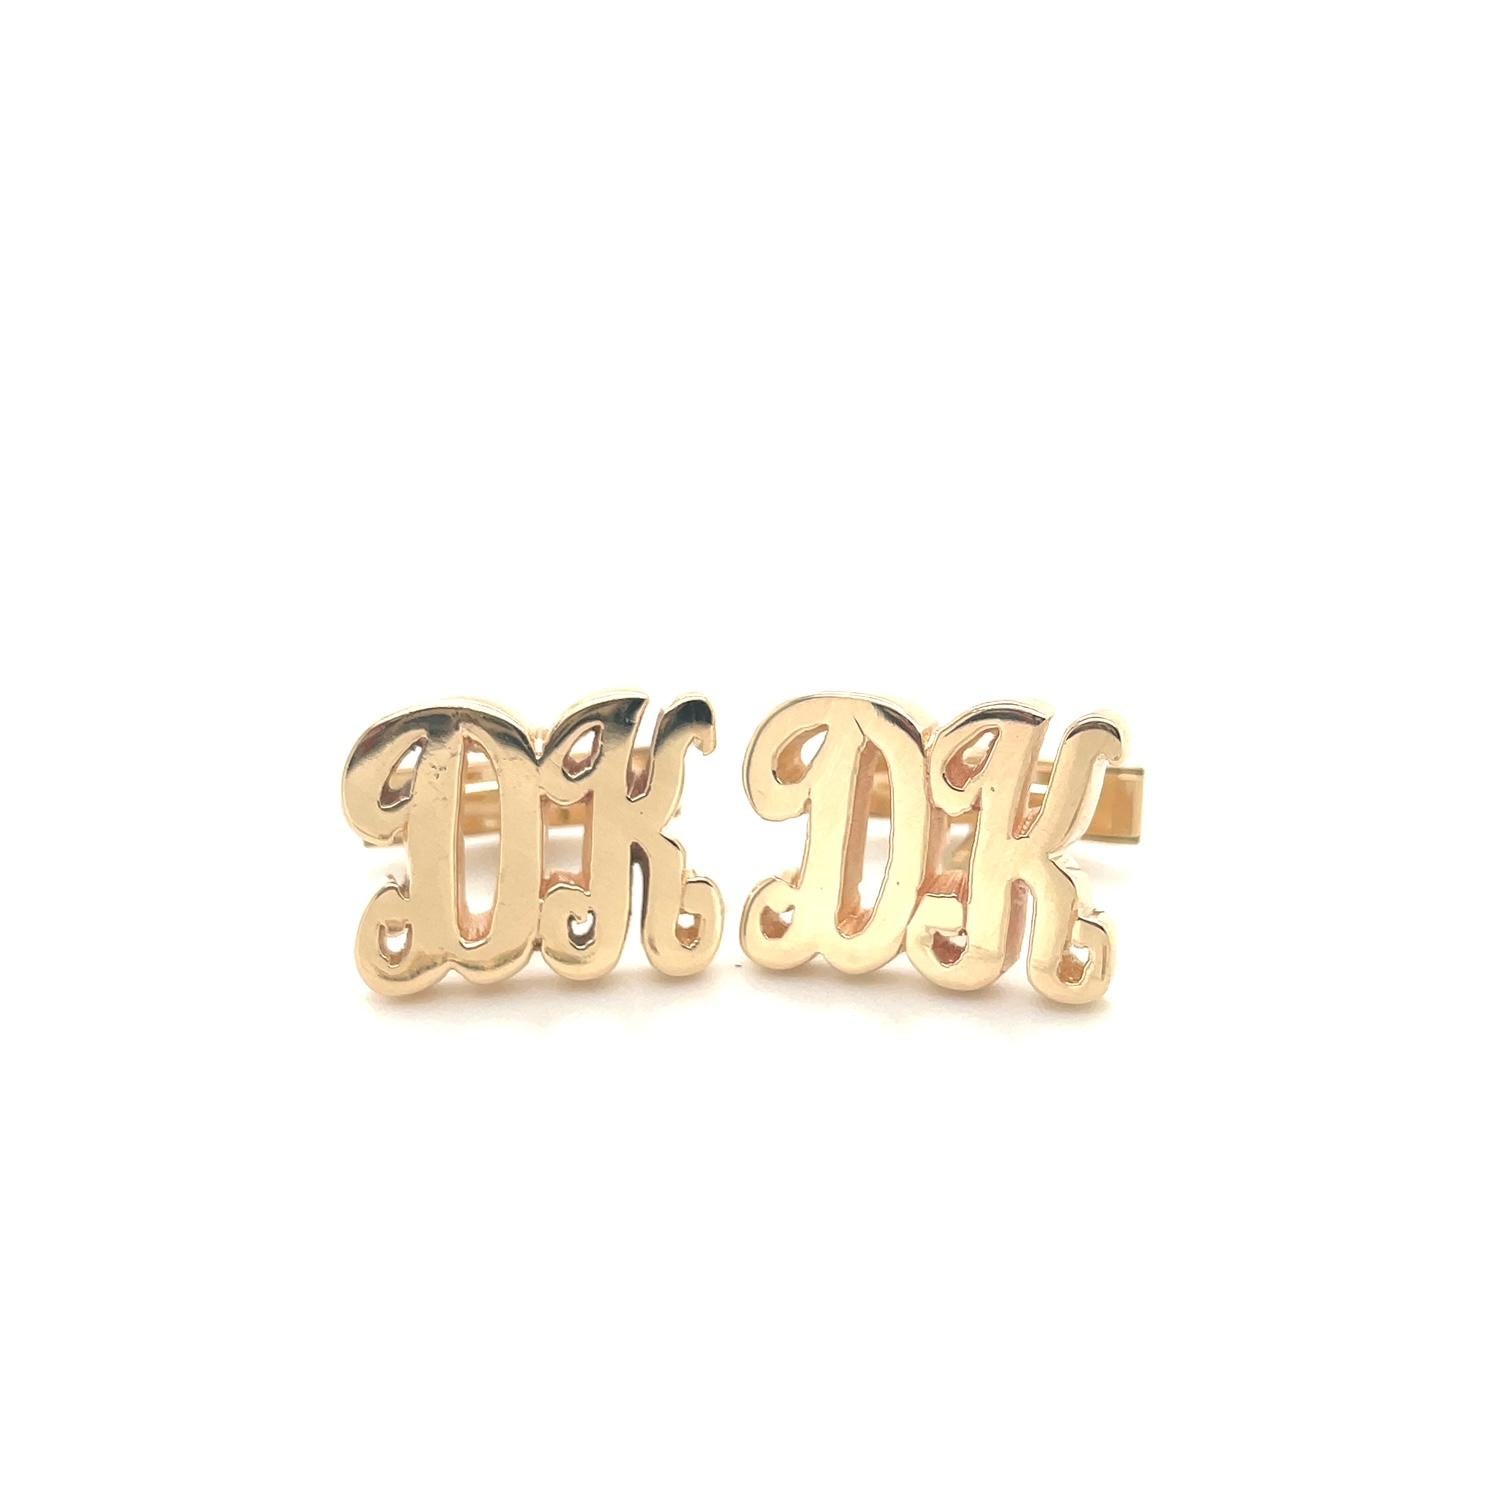 DK Initial Gold Cufflinks In Excellent Condition For Sale In New York, NY